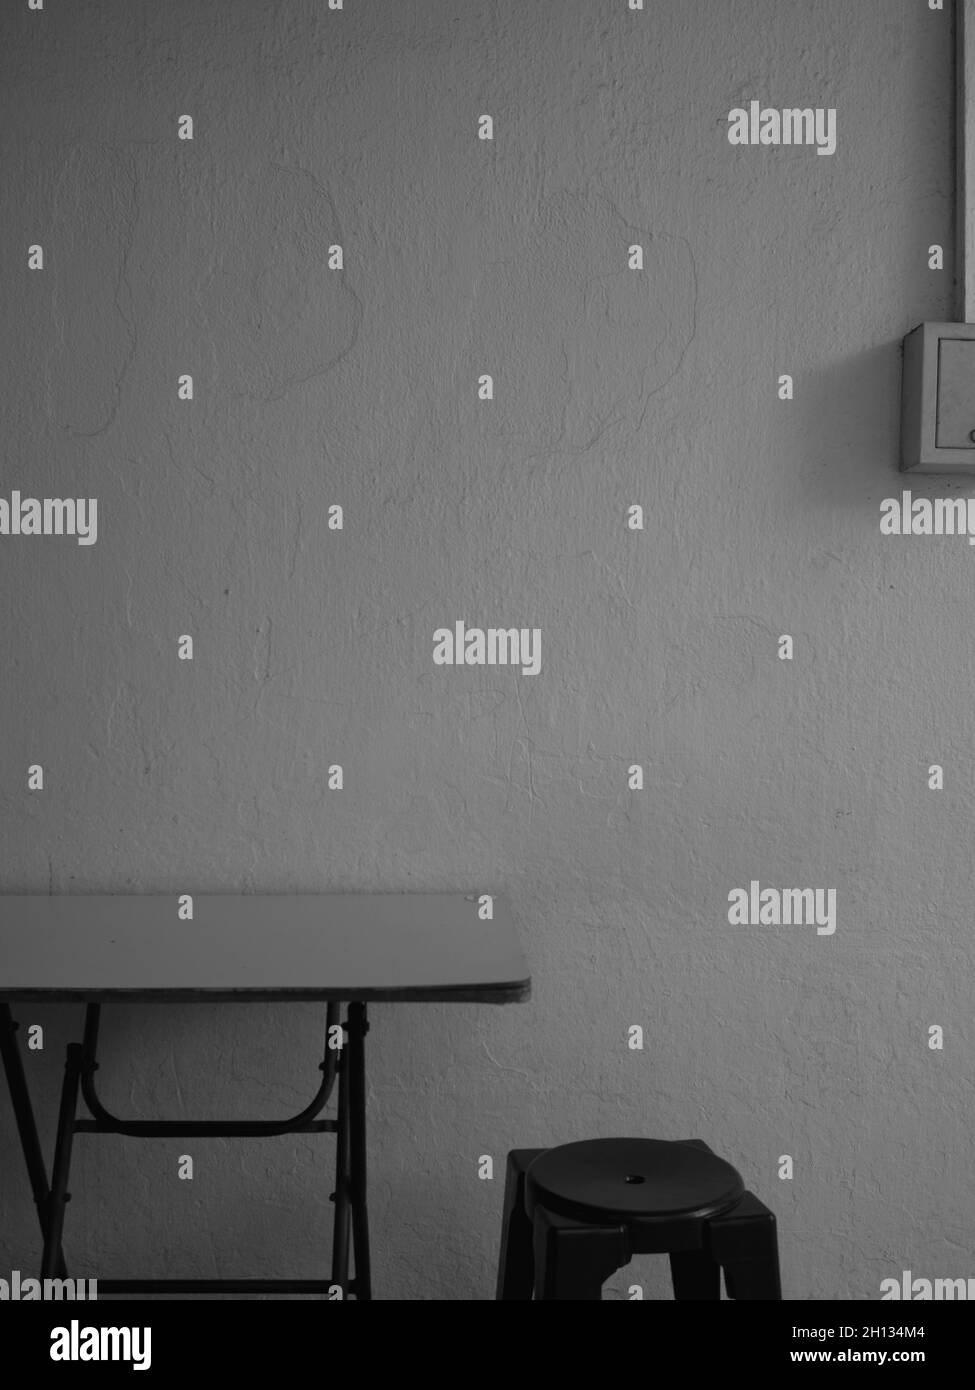 Folding table at tiong bahru coffee shop Stock Photo